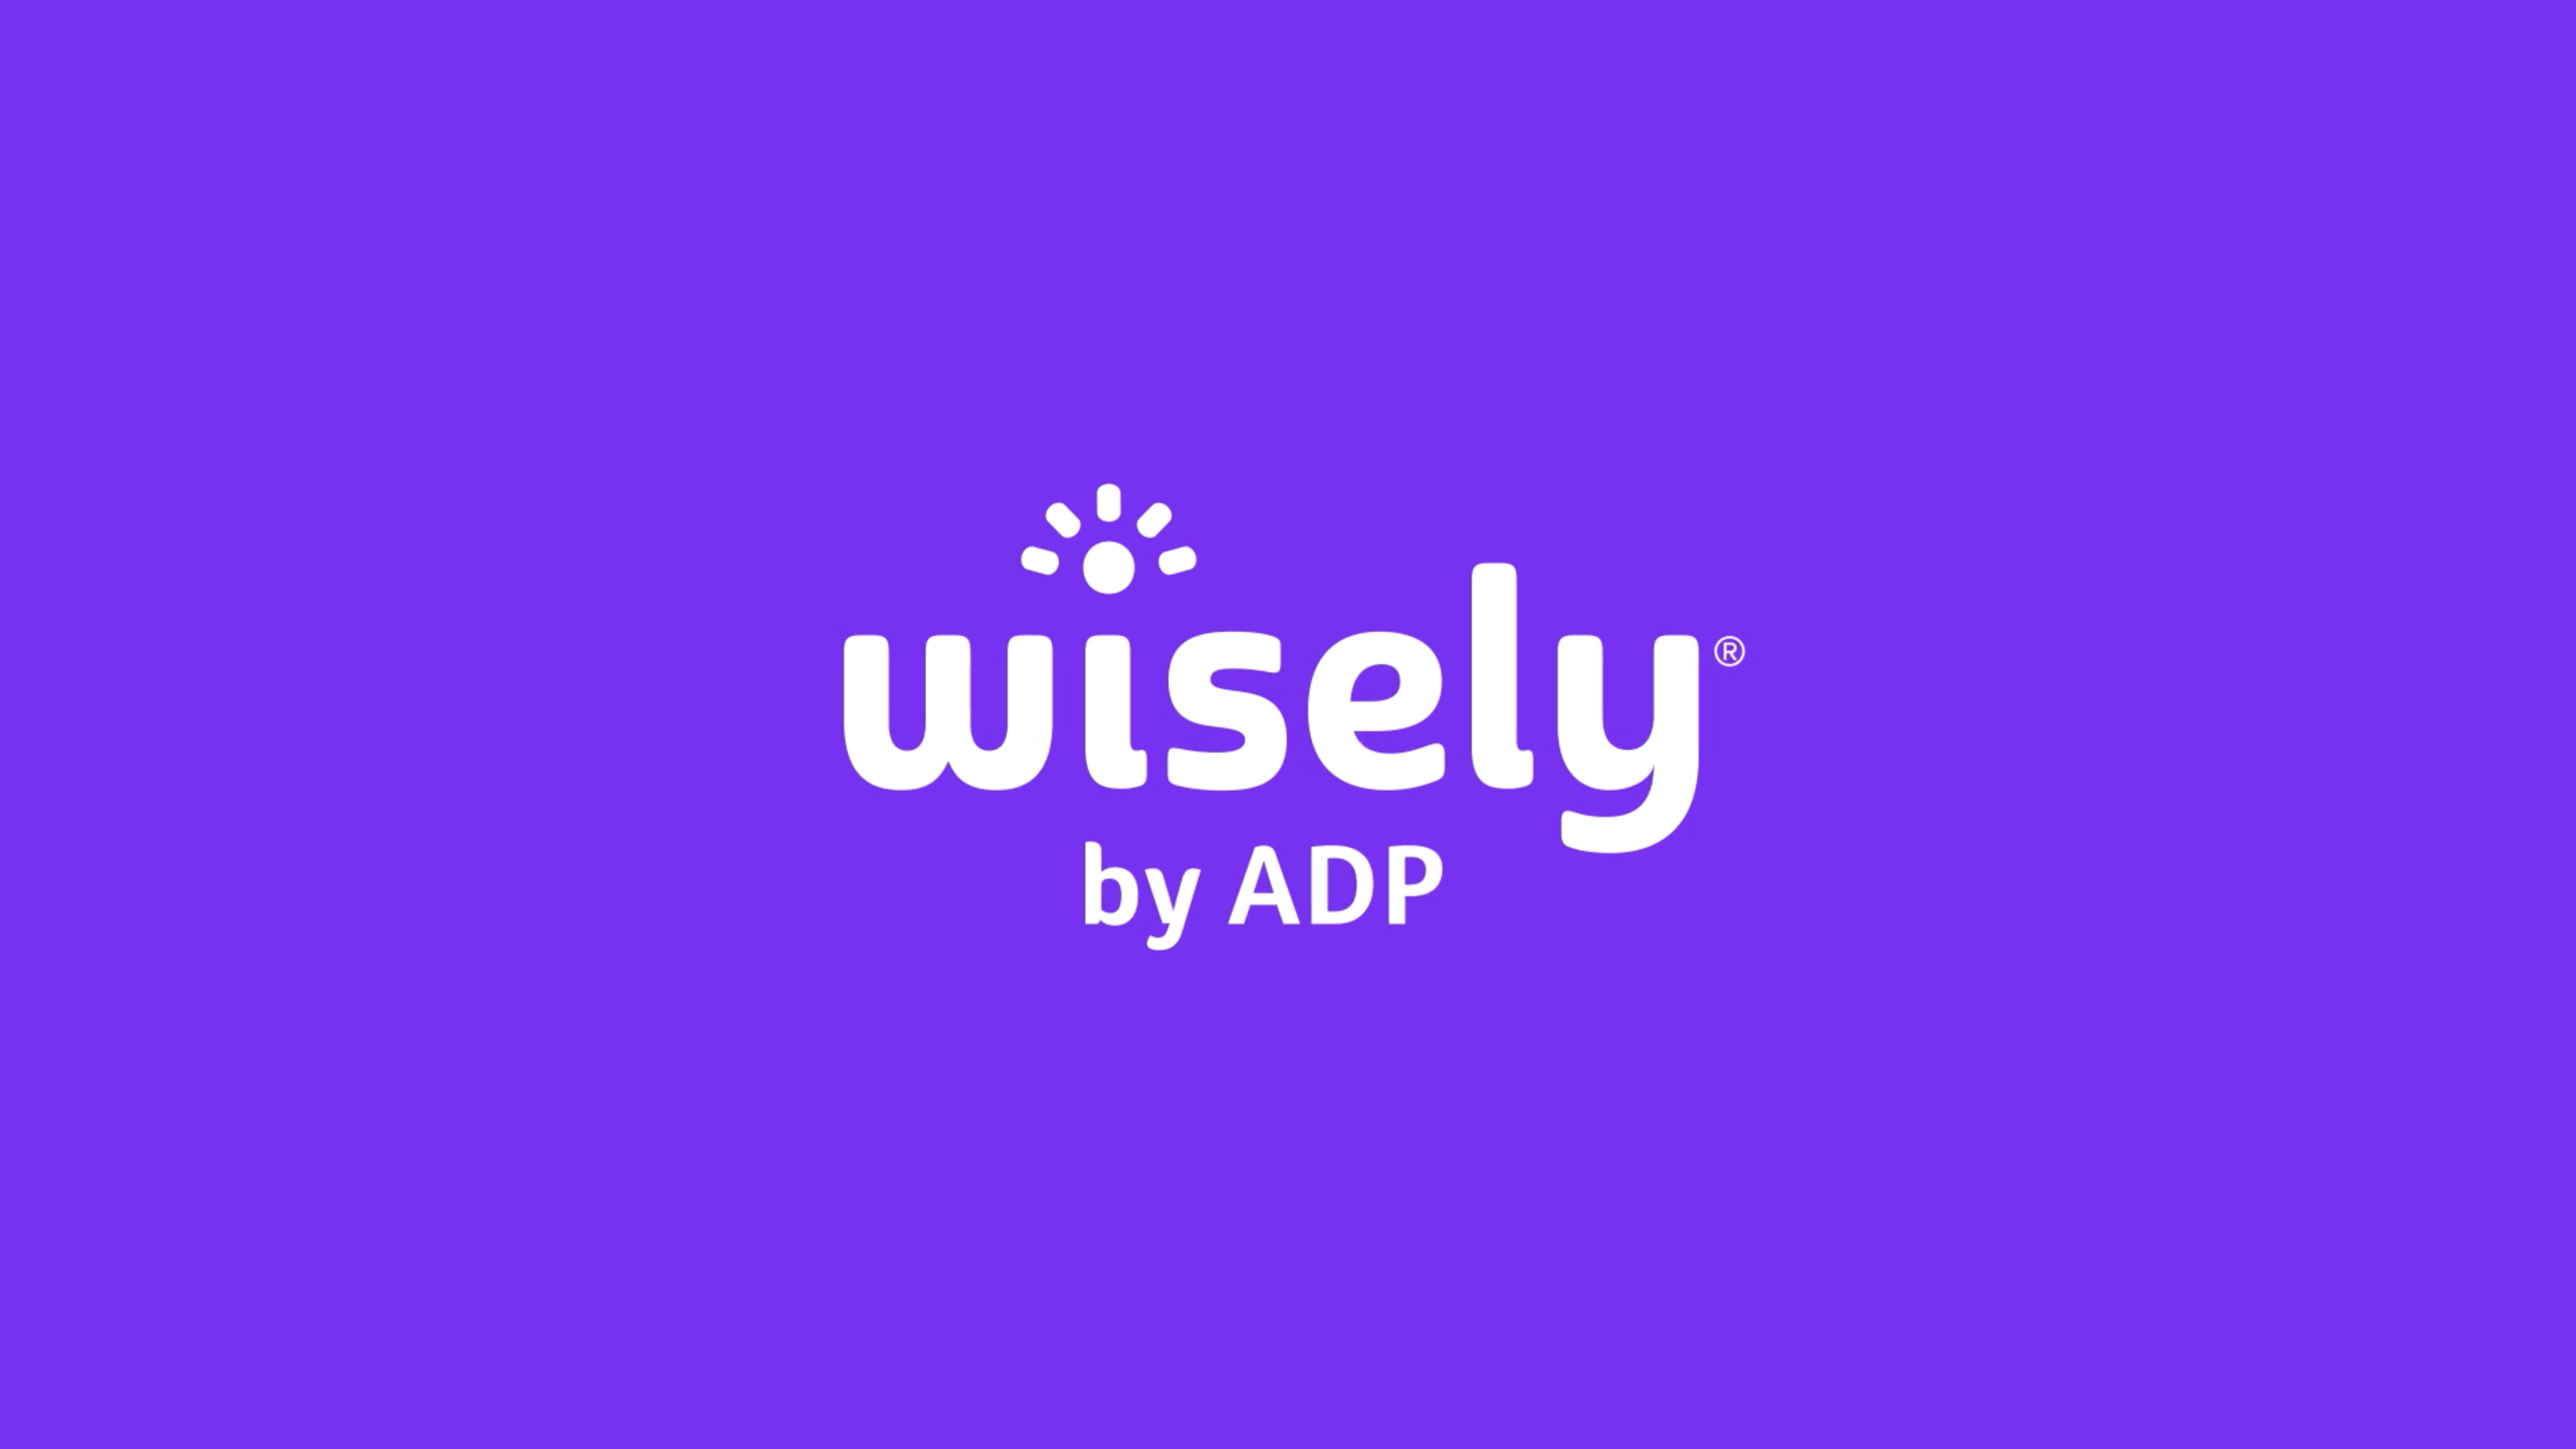 mywisely.com activate